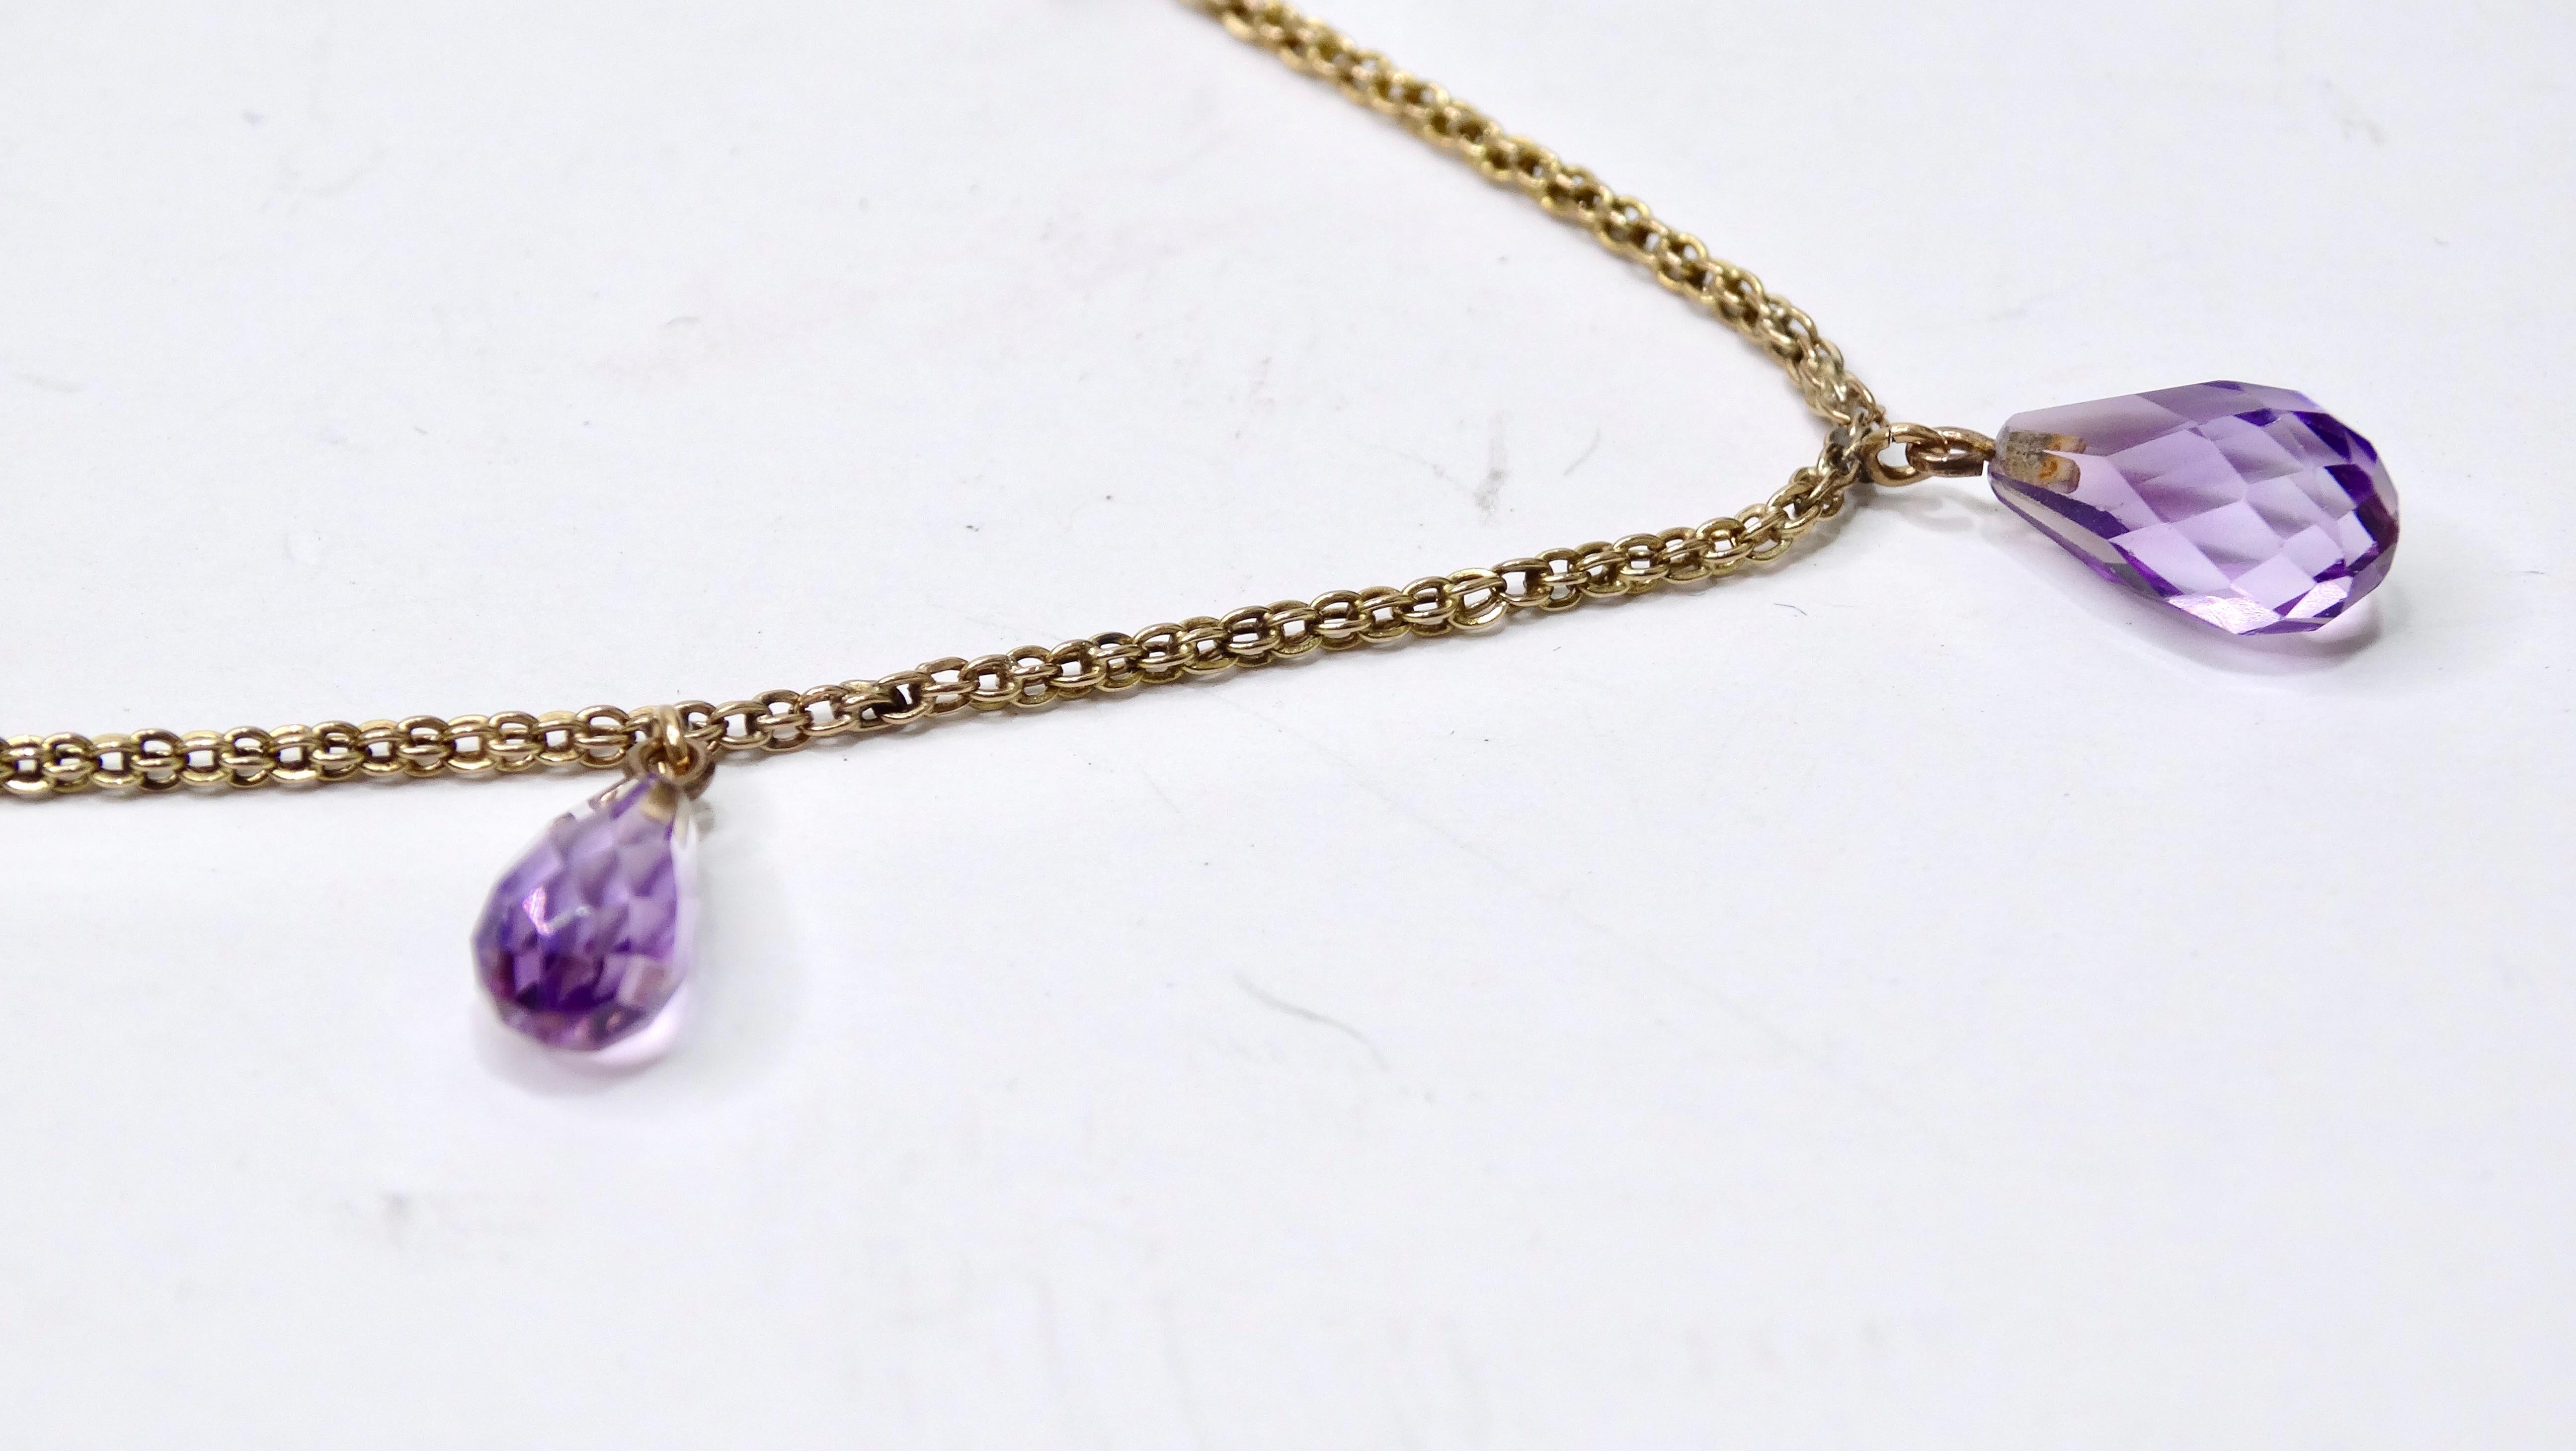 14k Gold and Amethyst Teardrop Necklace For Sale 2